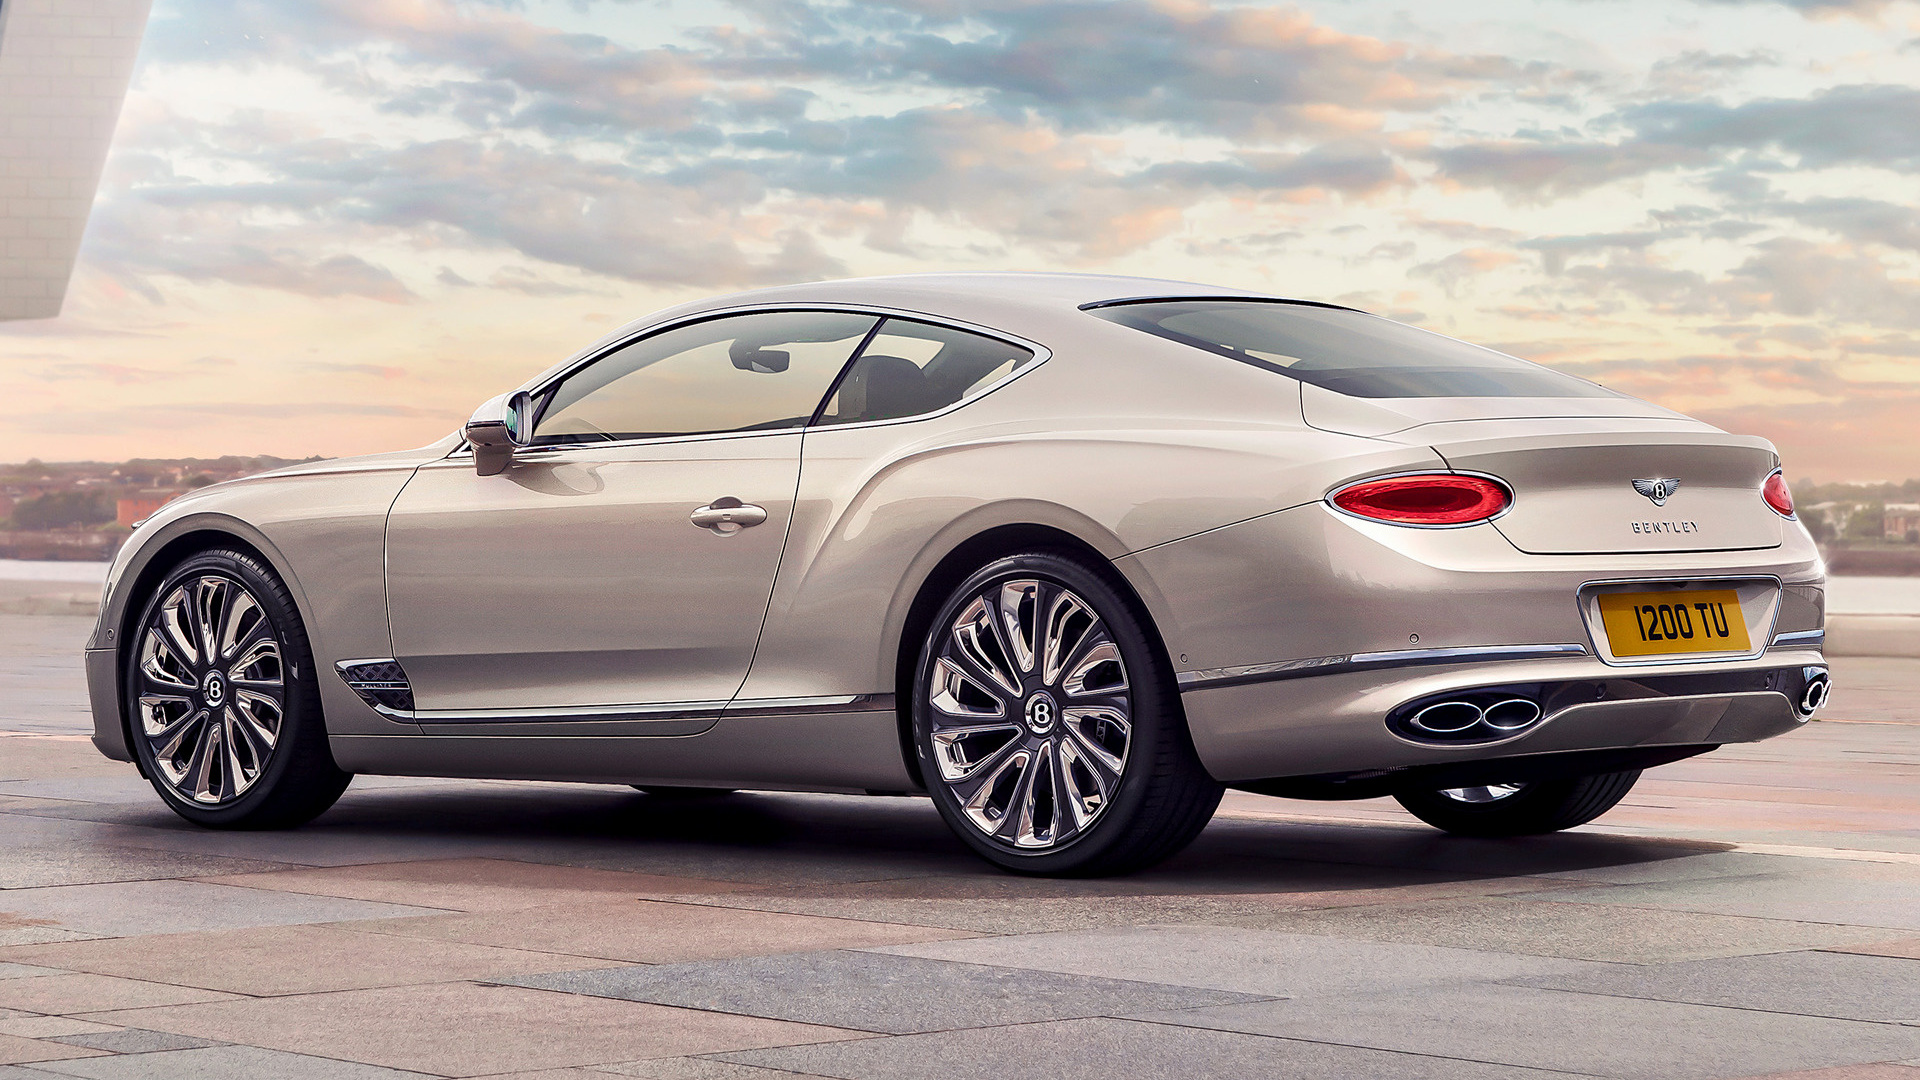 The Luxury Of Refinement: The 2020 Bentley Continental GT Mulliner